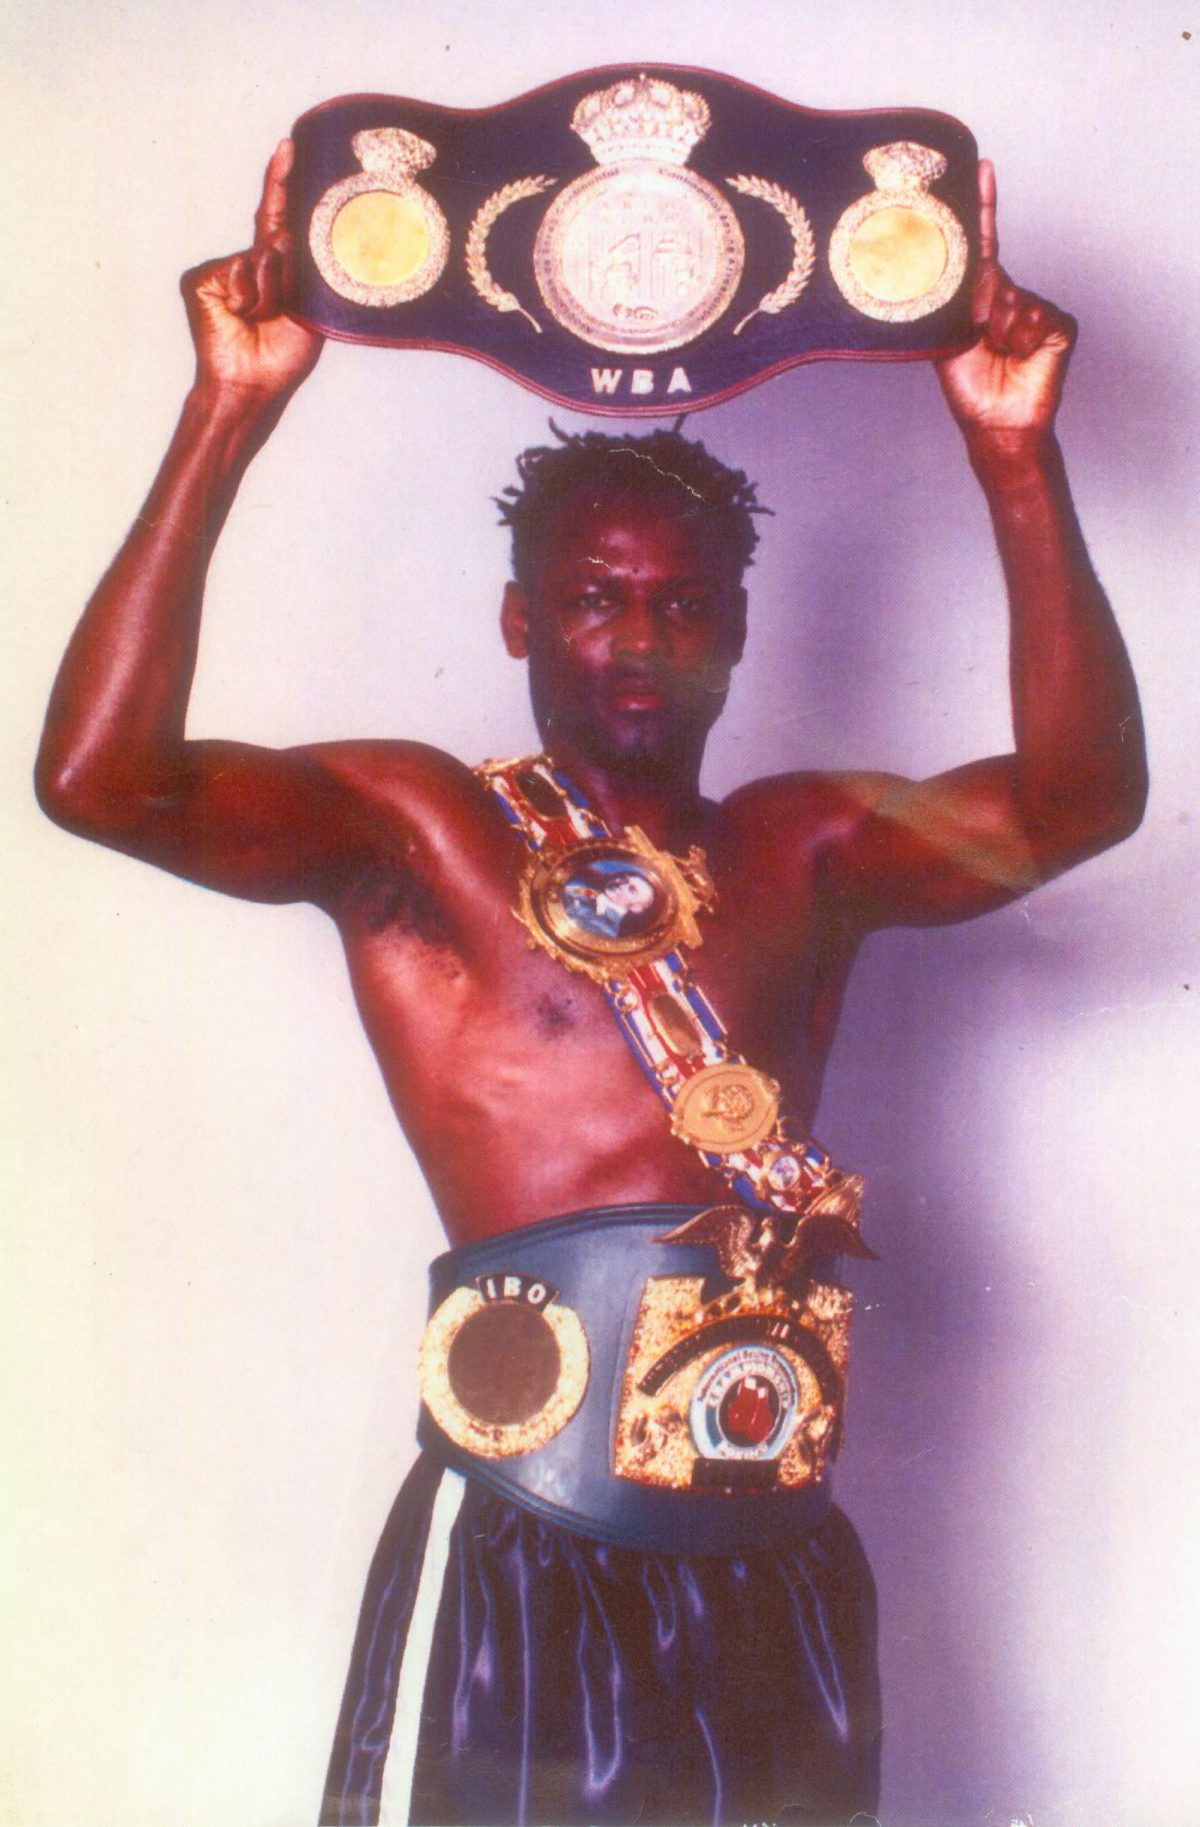 Howard Eastman was the national middleweight champion of Guyana.
